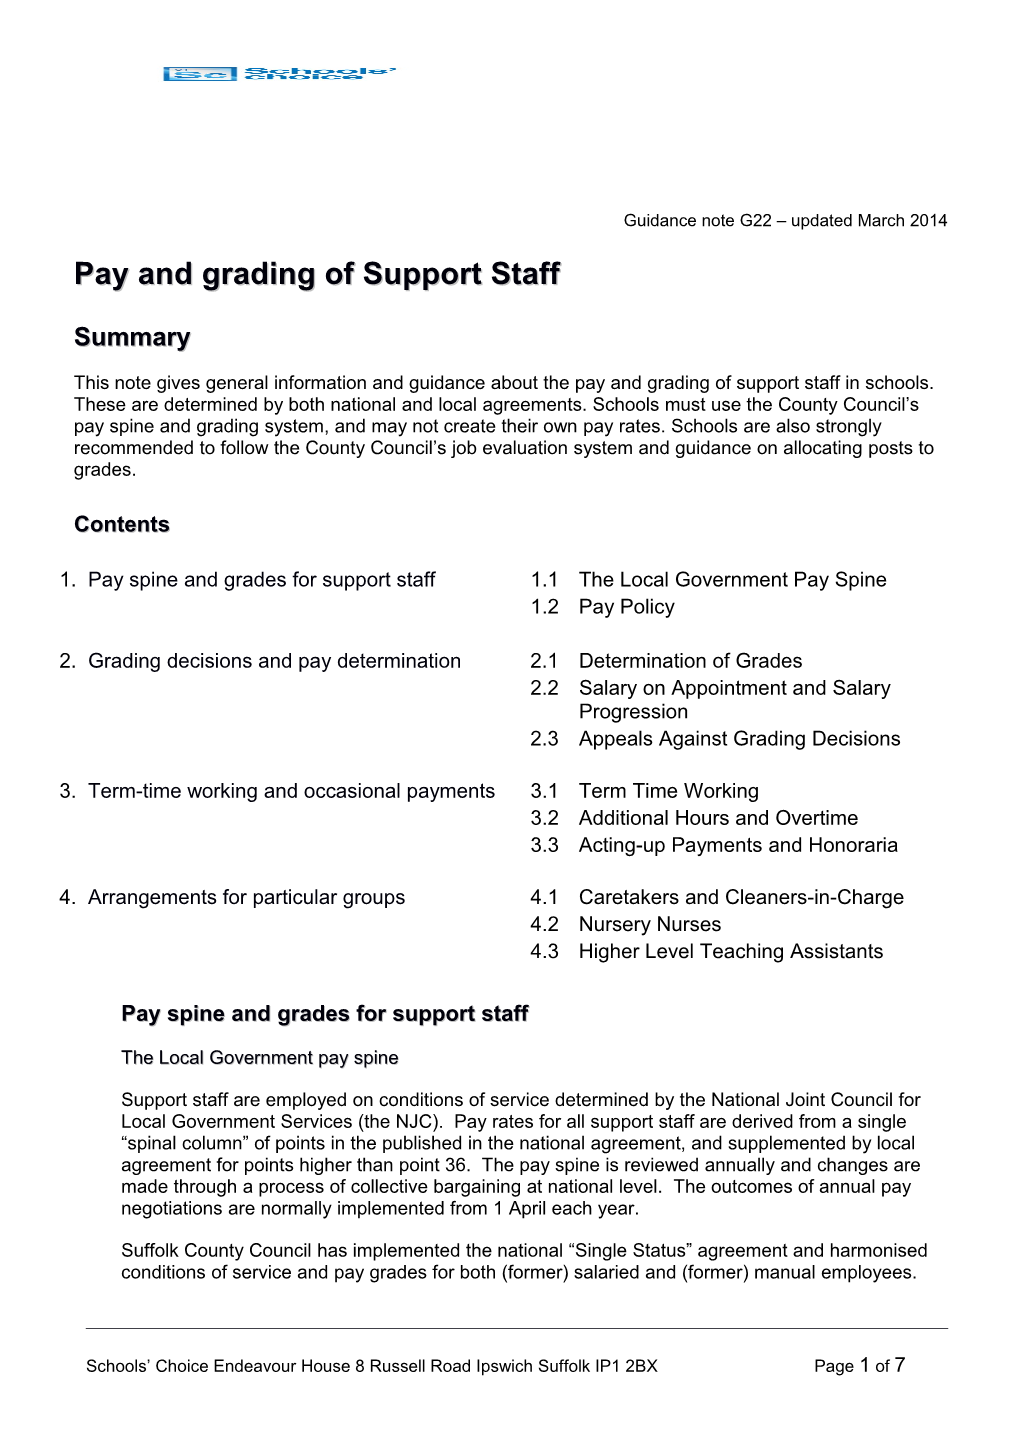 Pay and Grading of Support Staff